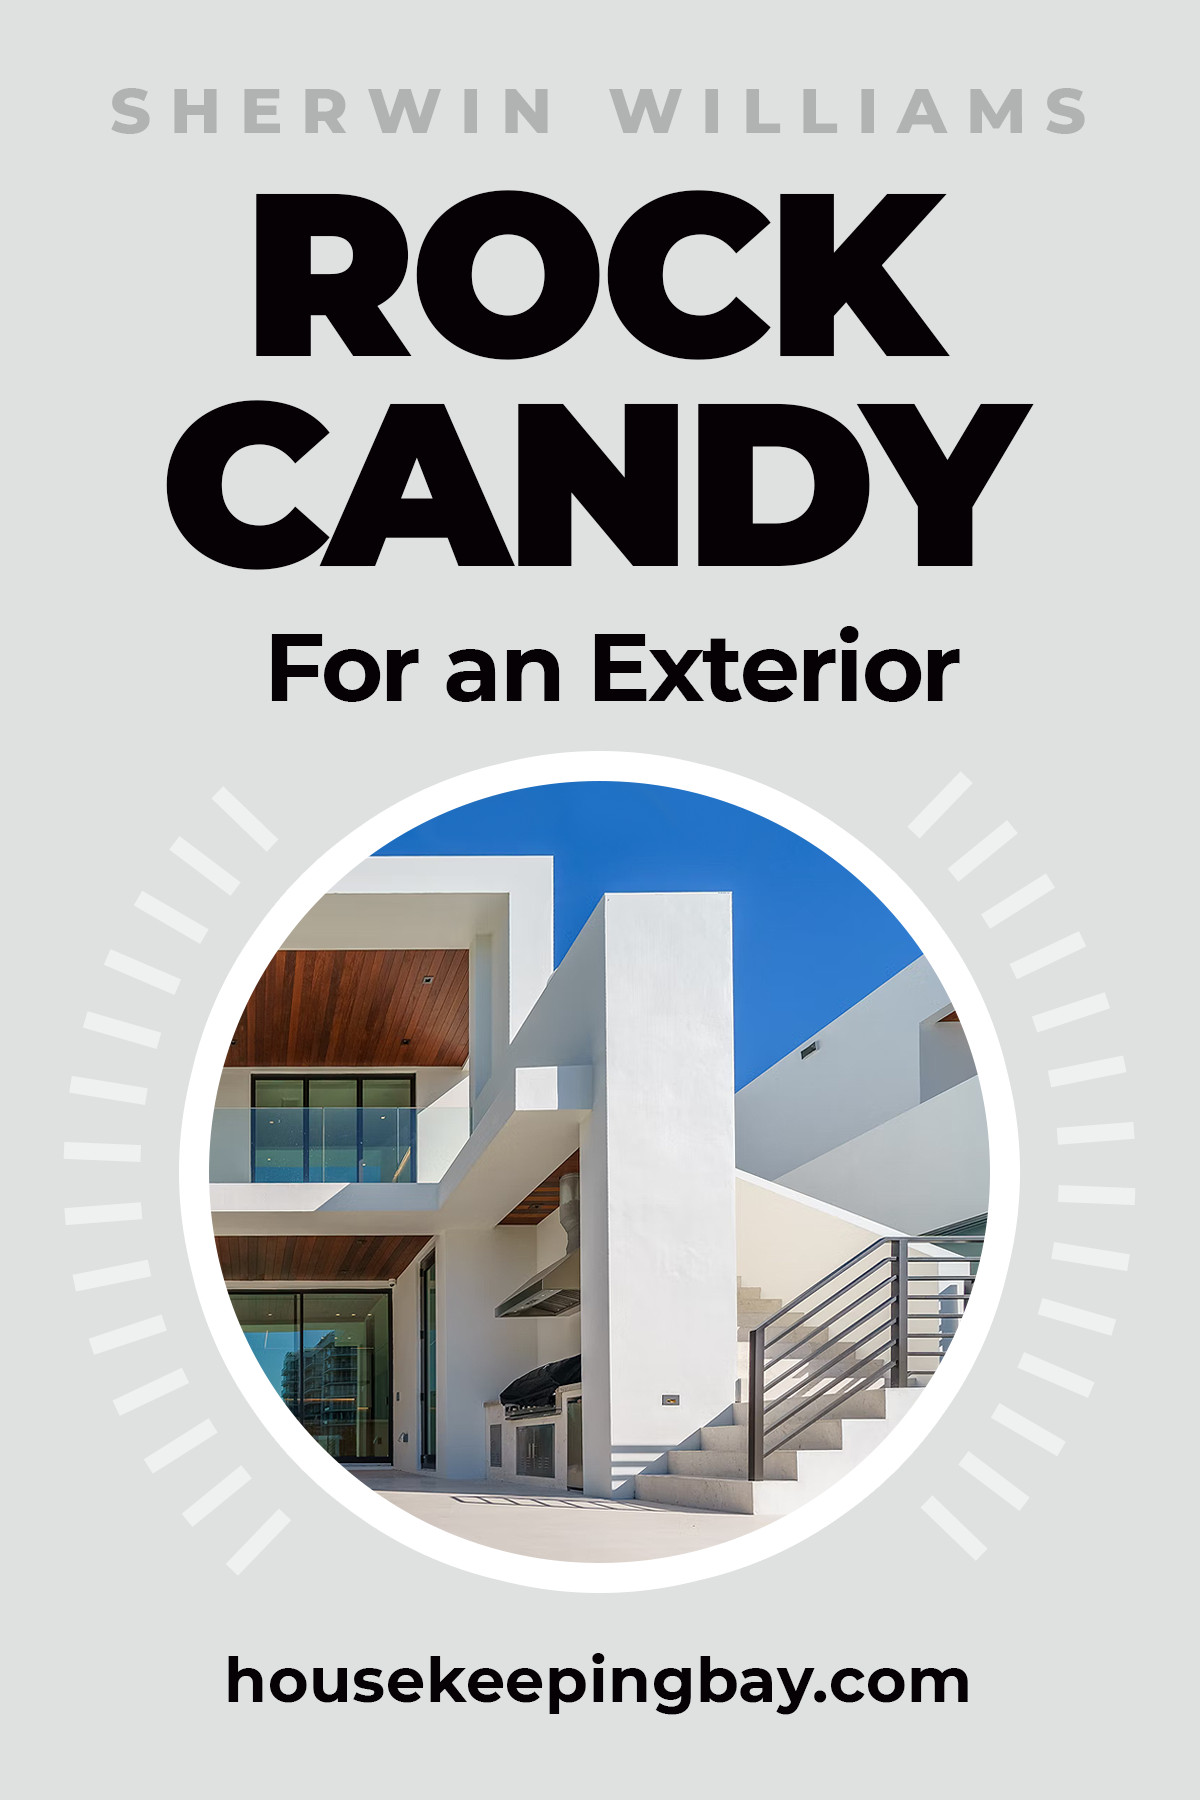 Rock Candy For an Exterior